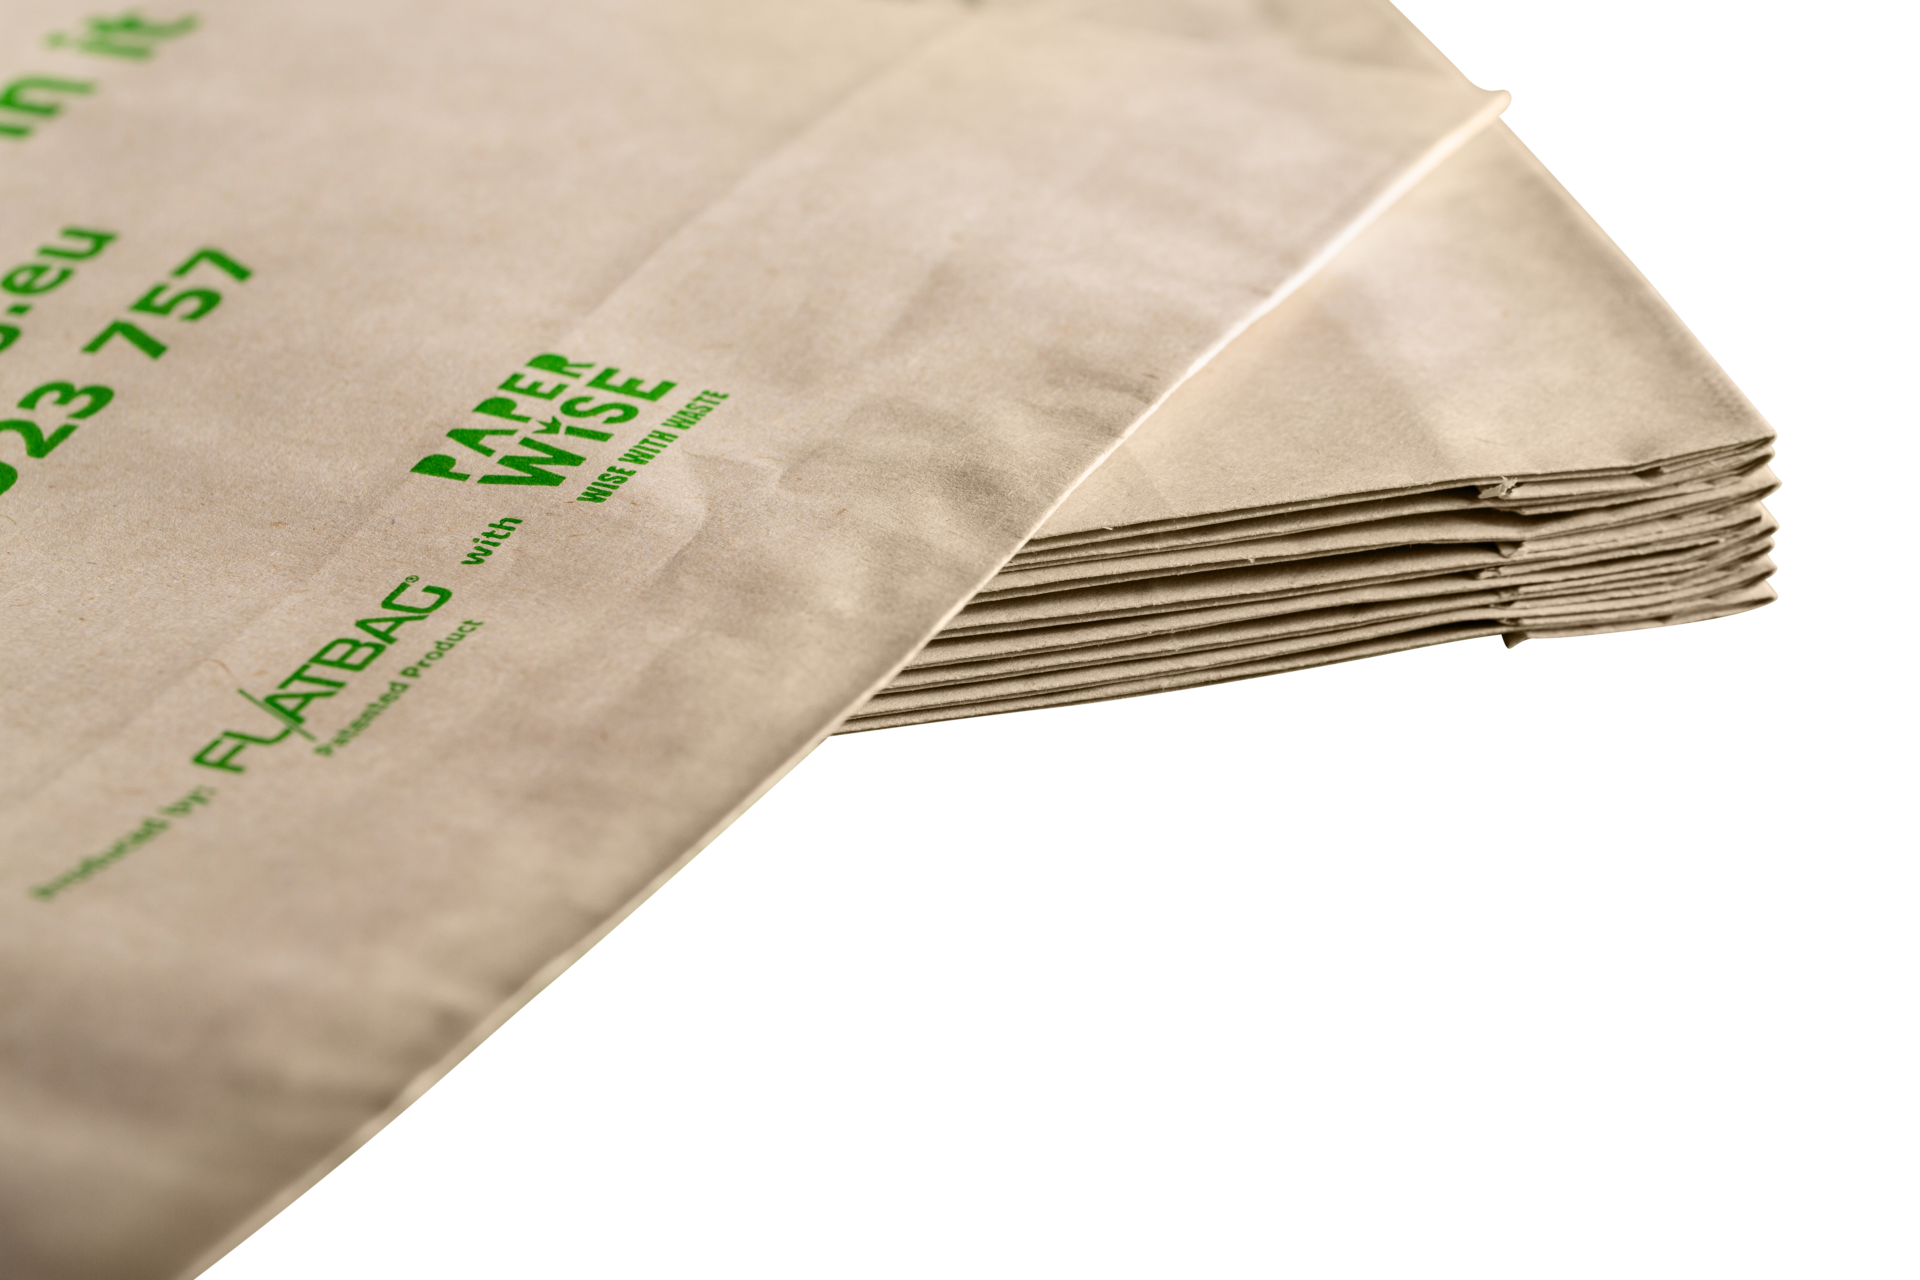 wp content uploads  0    0  organic paper board treefree bag paperbag flatbag sustainable packaging naturalbag 5c